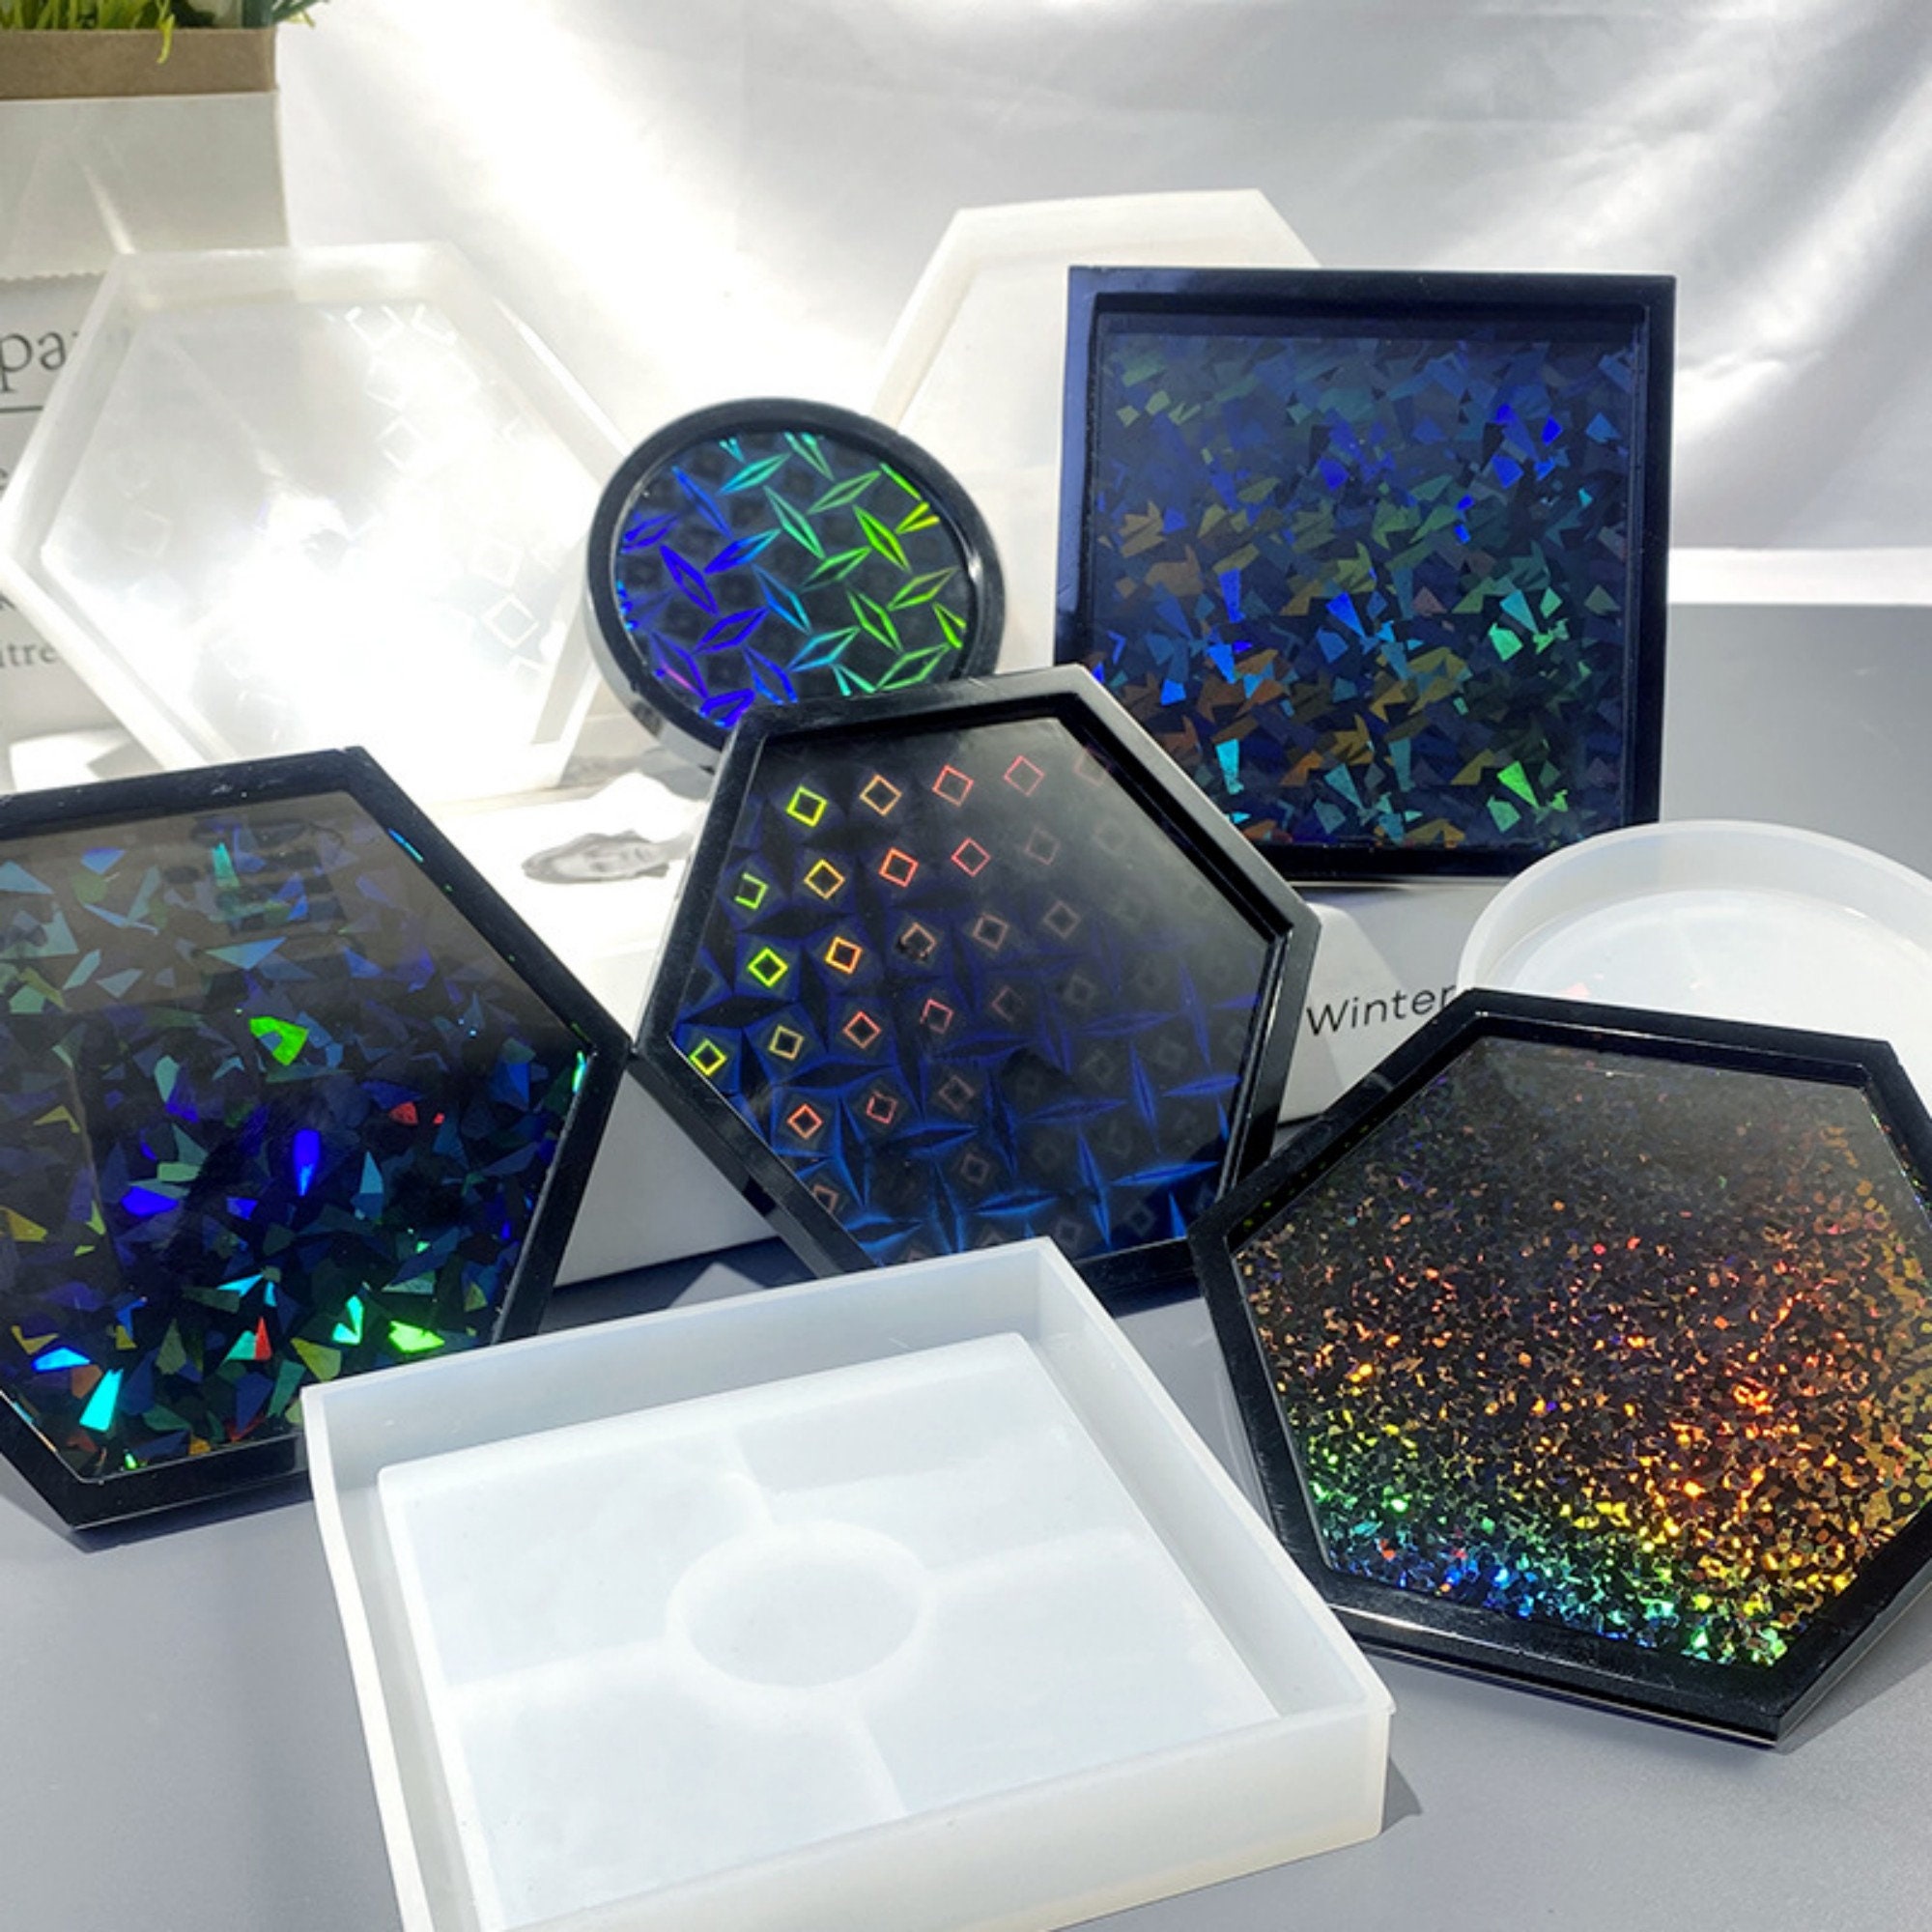 HOLOGRAPHIC Pinwheel Mold Insert for Resin/ Silicone 